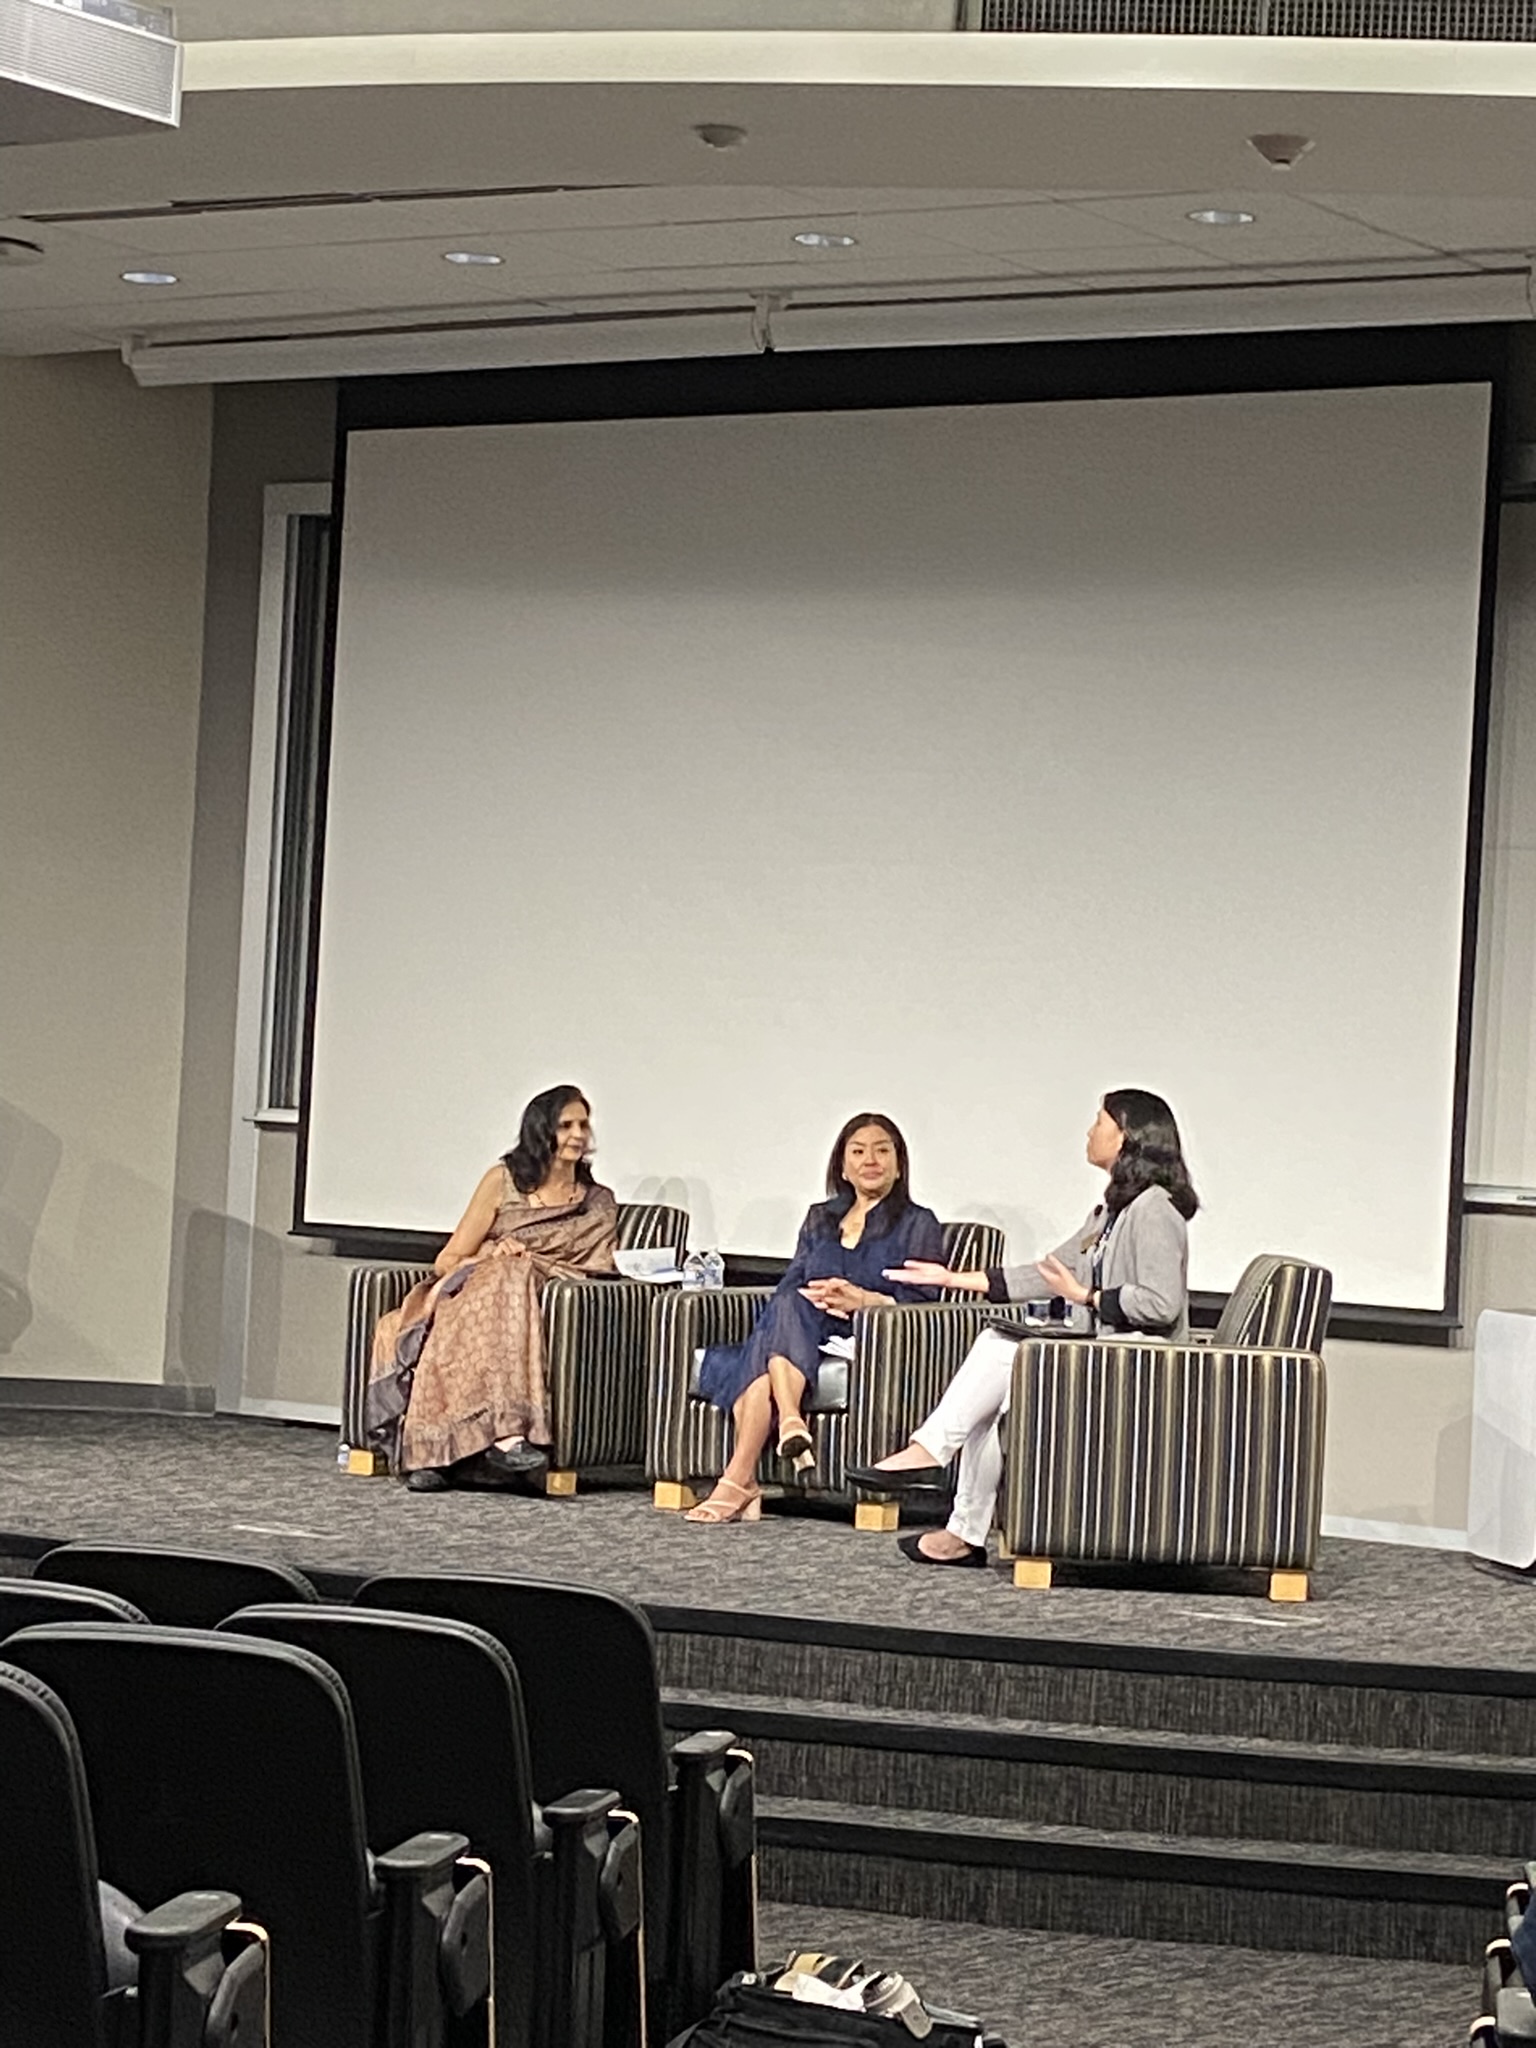 From left to right: Tanuja Singi (Vice President of Global Operations at Newell Brands), Lily Pabian (Executive Director at We Love Buford Highway), Skye Blevins (Senior Product Engineer at Newell Brands and Evening MBA Student ‘23)